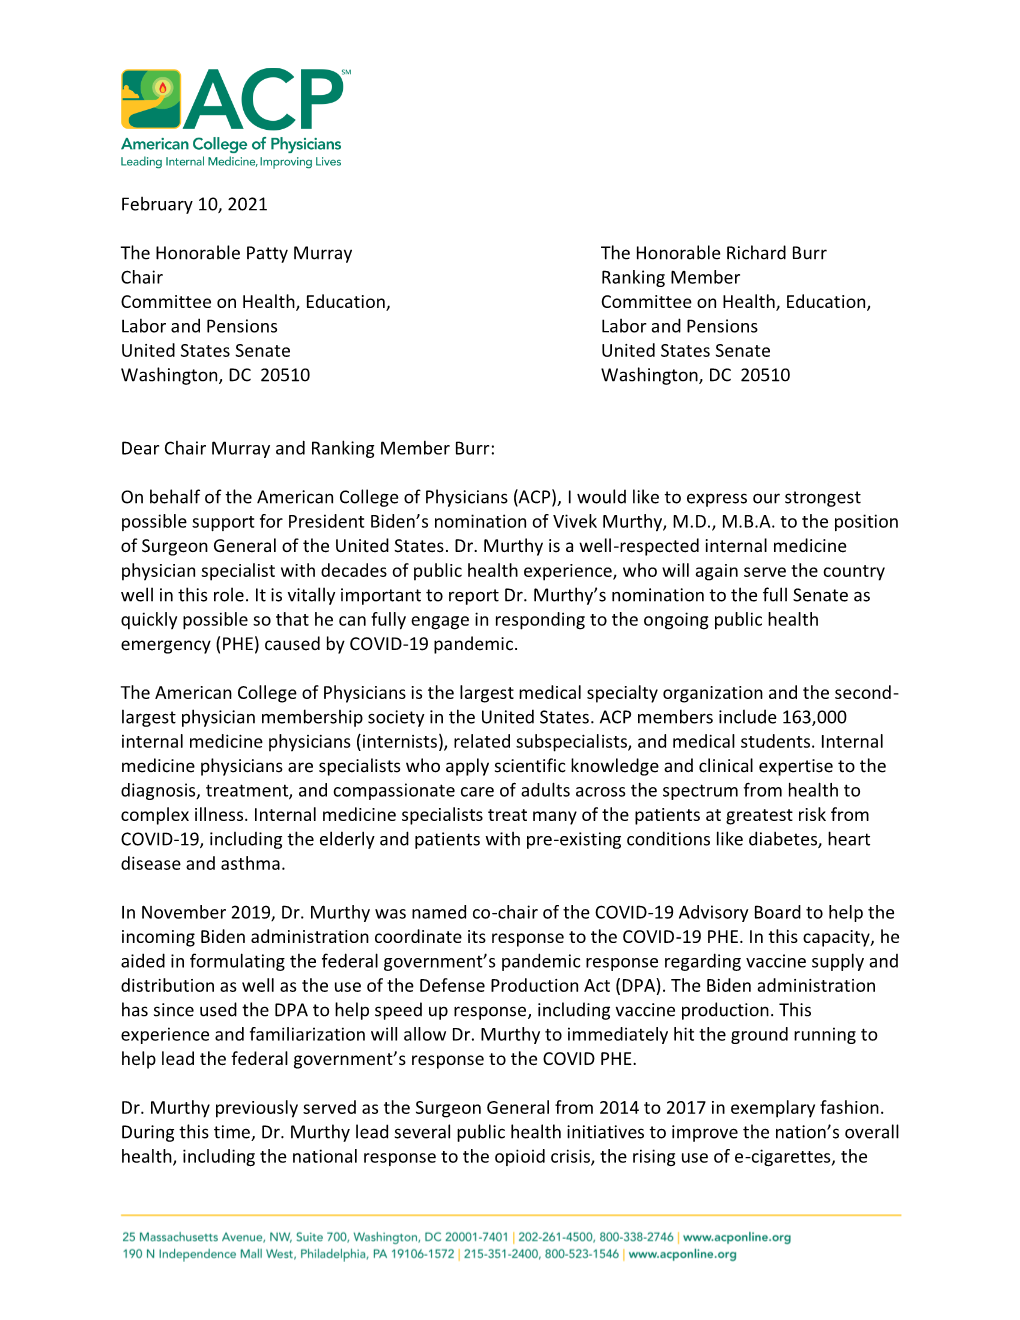 ACP Letter of Support for the Nomination of Vivek Murthy, MD